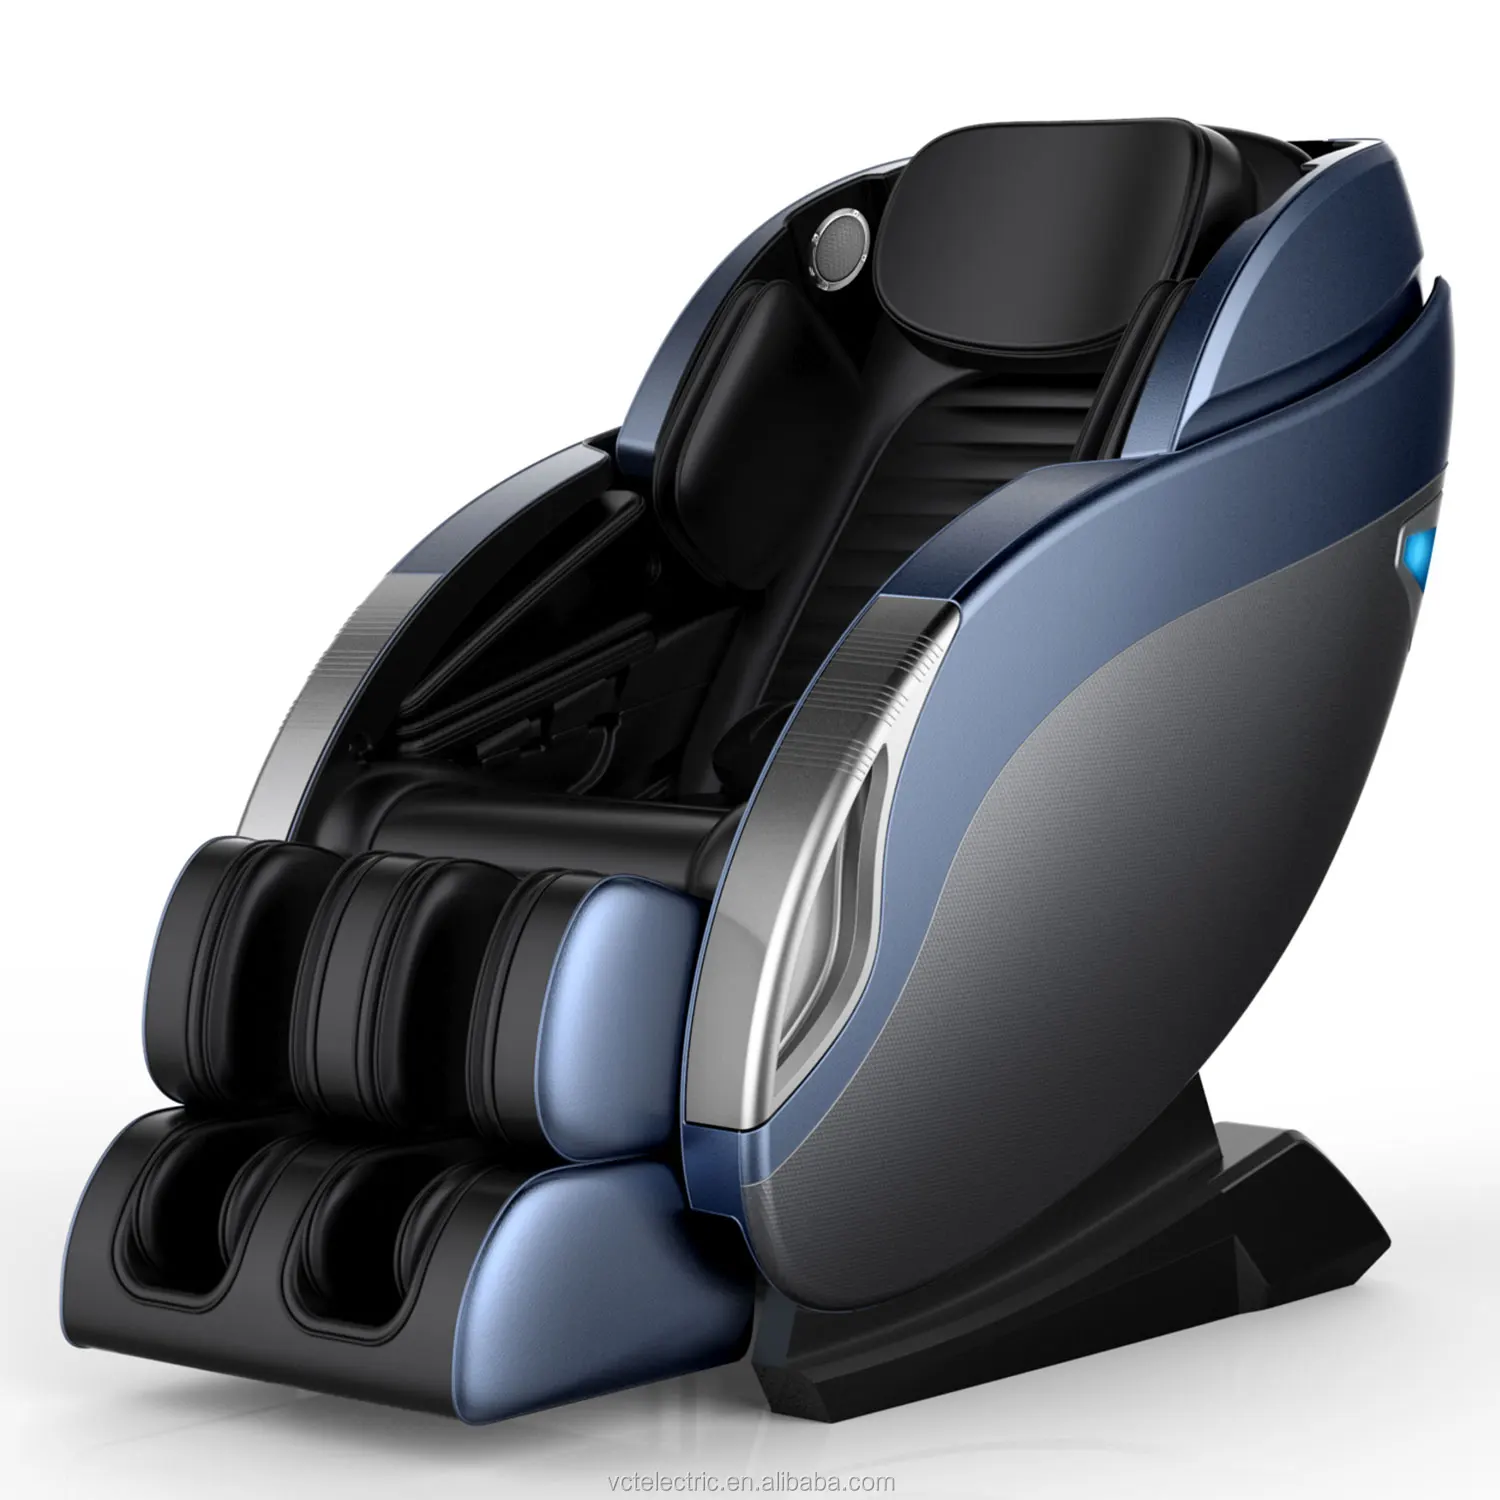 Full Body Massage Chair Competitive Price Massage Chair Buy Portable Massage Chair Leg Massage Chair Full Body Massage Chair Product On Alibaba Com